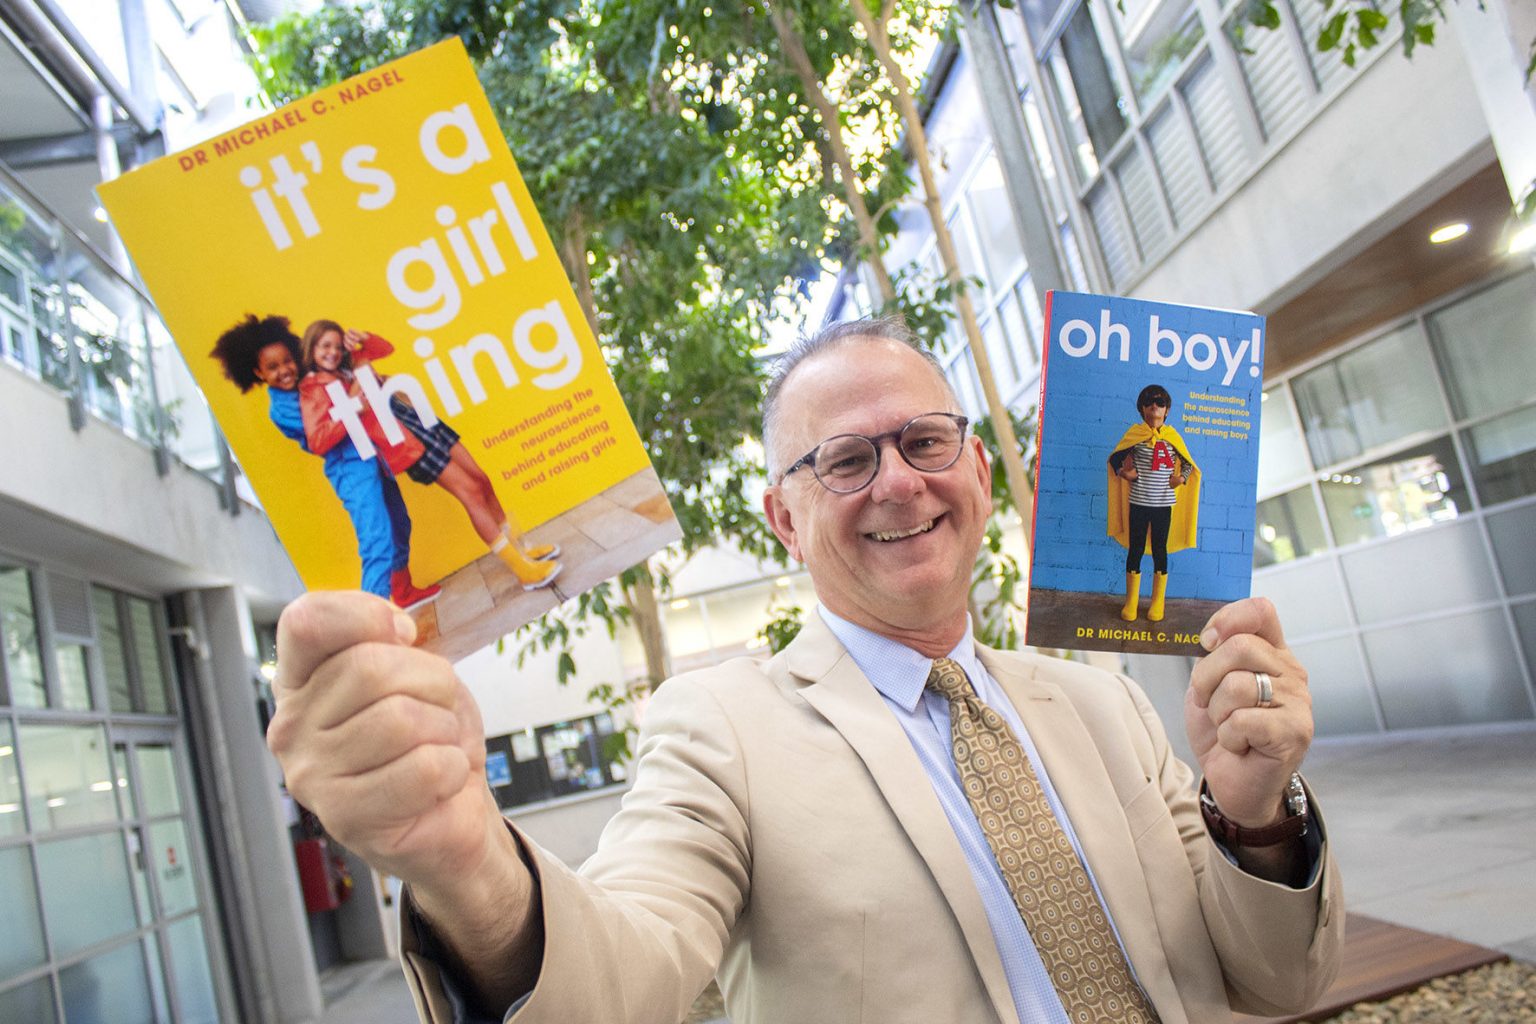 Expert reveals different learning needs of boys and girls